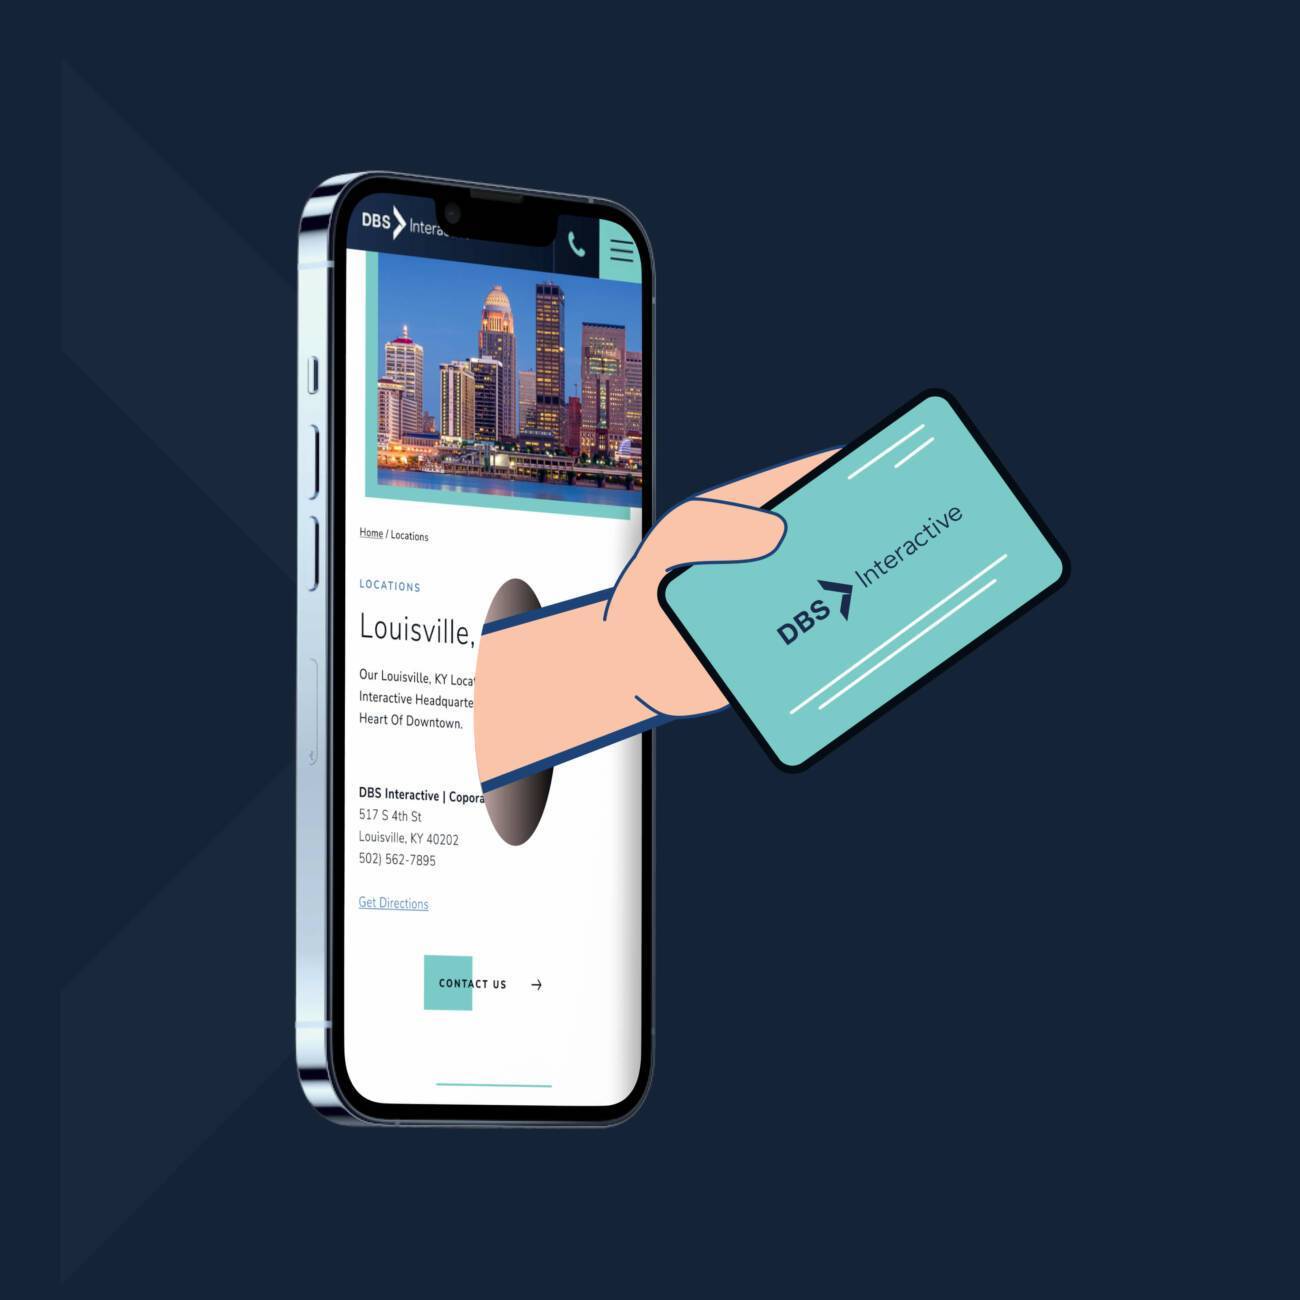 Image of hand offering a business card from a smartphone to illustrate the benefits of a great website making a great first impression